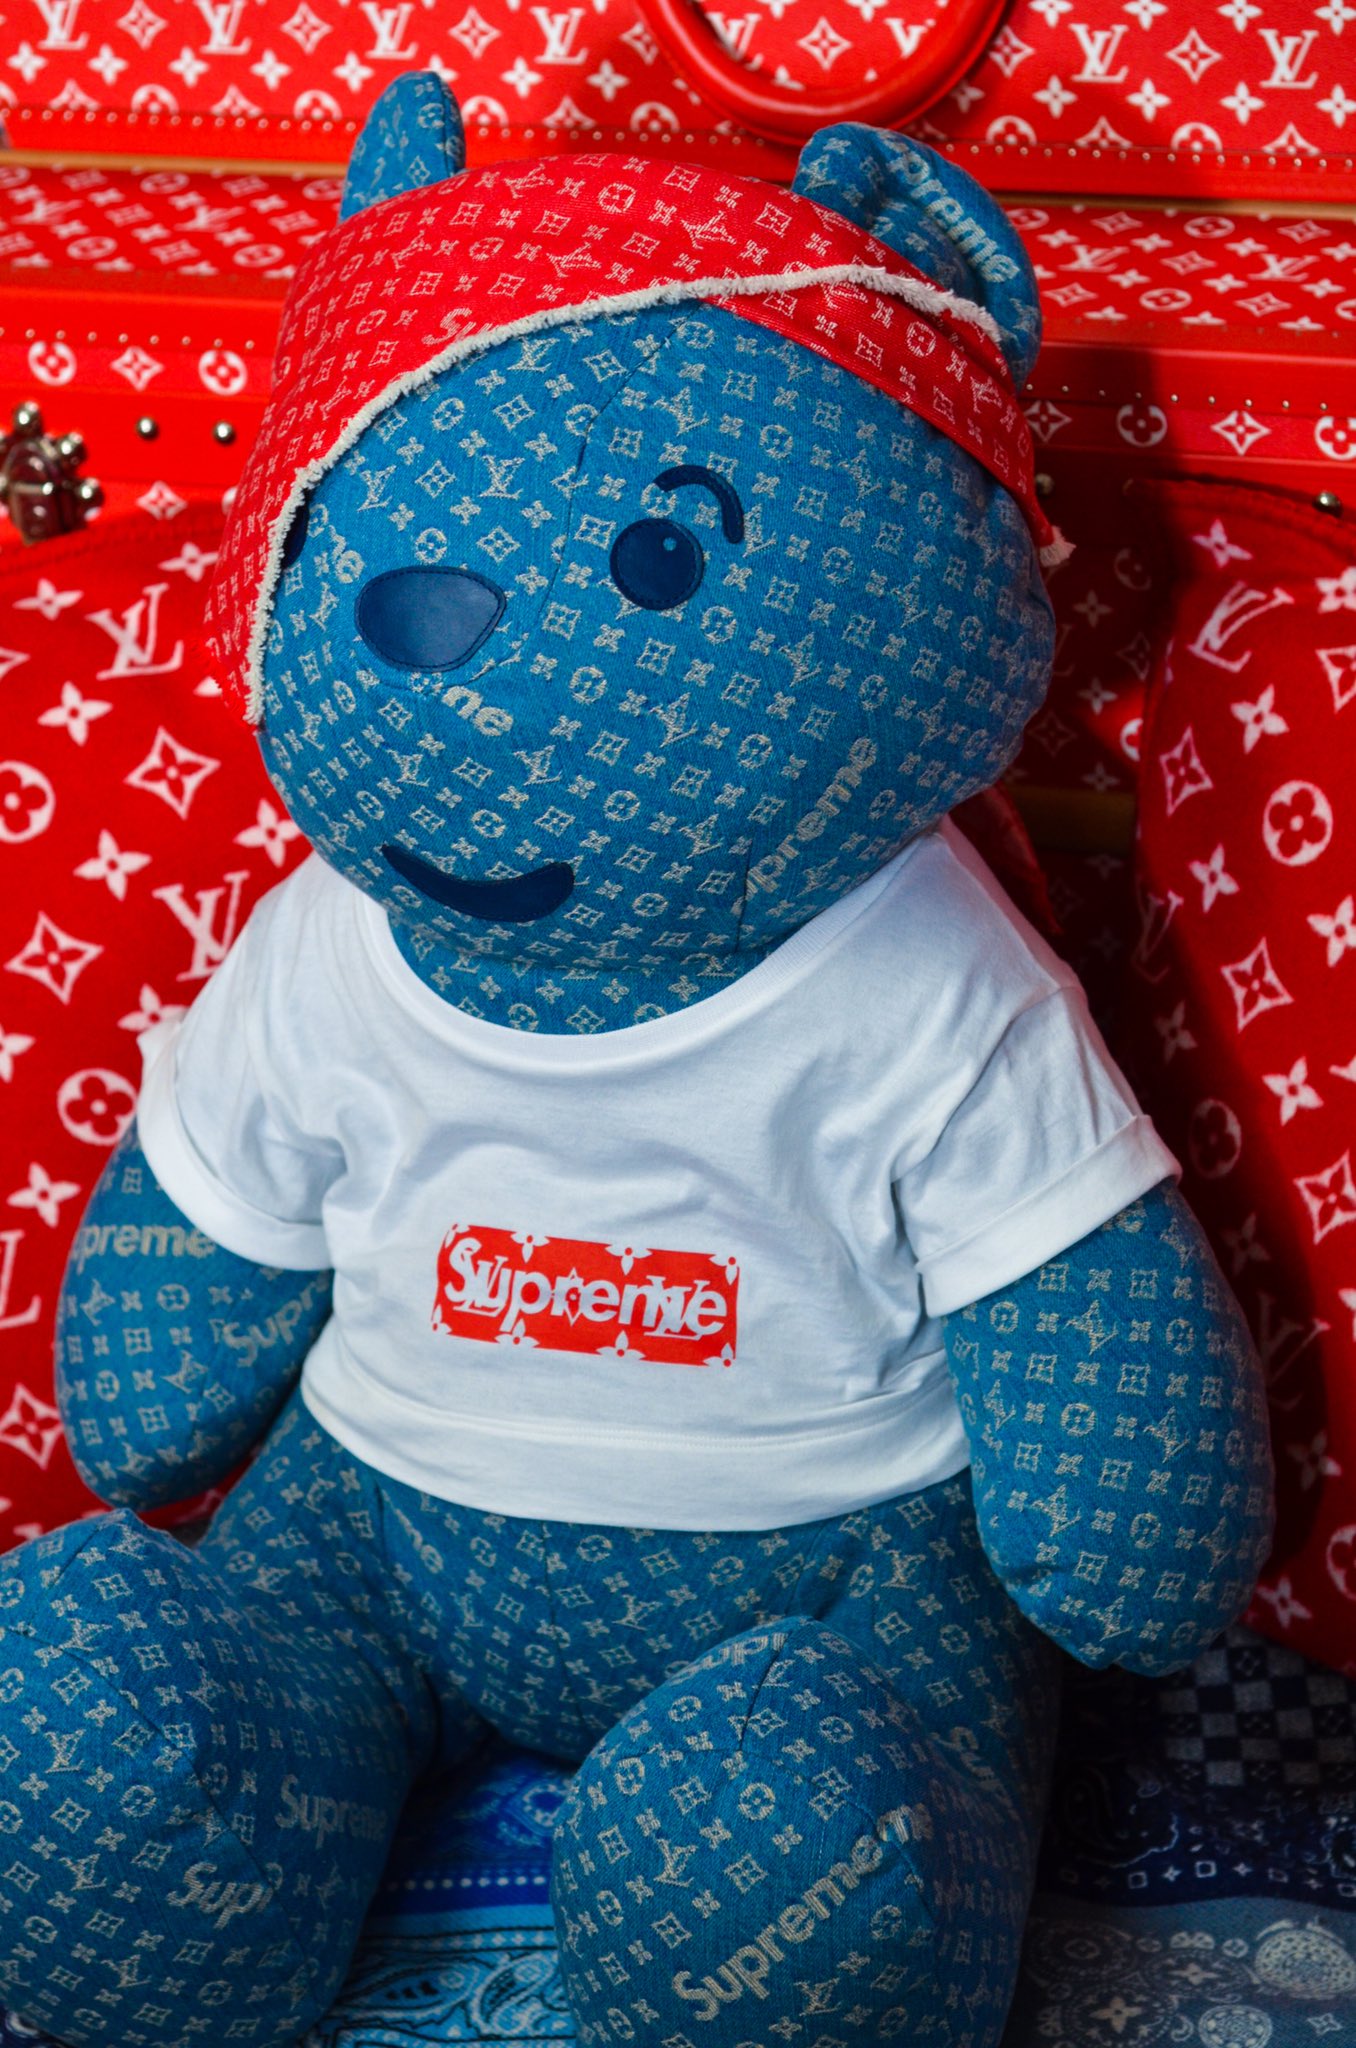 SAINT on X: Supreme/Louis Vuitton one of a kind bear for BBC's Children in  Need charity.   / X